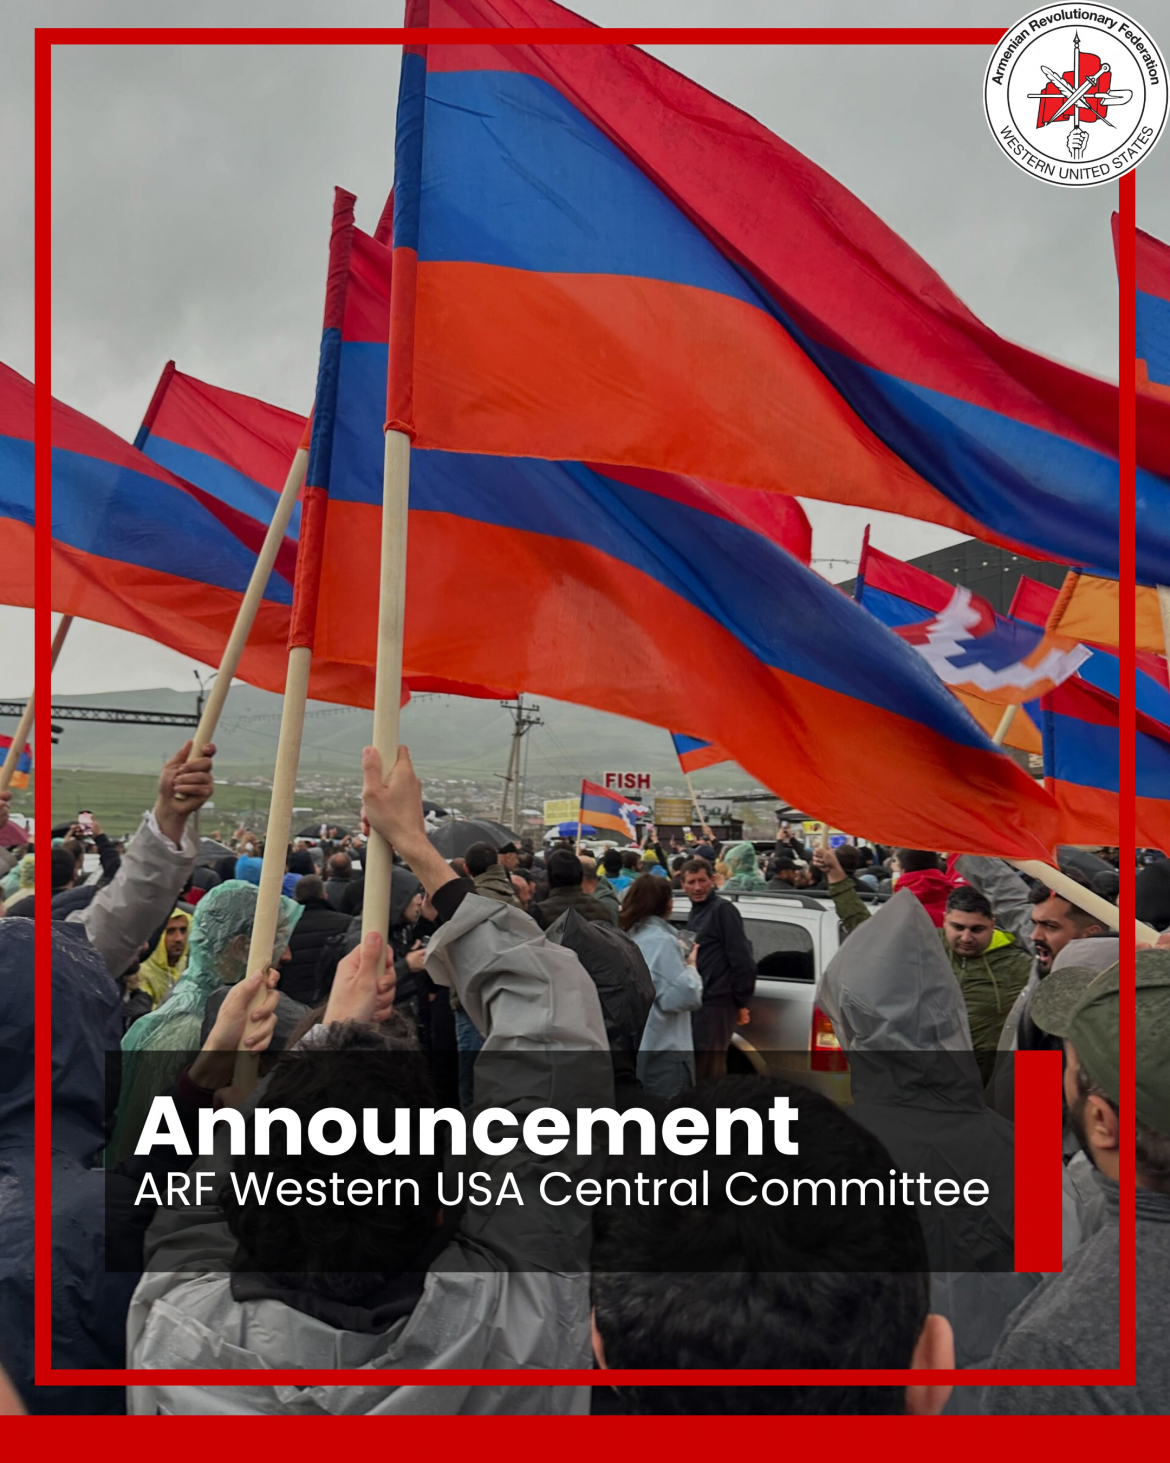 We call on Armenians throughout the Western United States to stand with the unified movement at this critically fateful time for the Armenian Nation